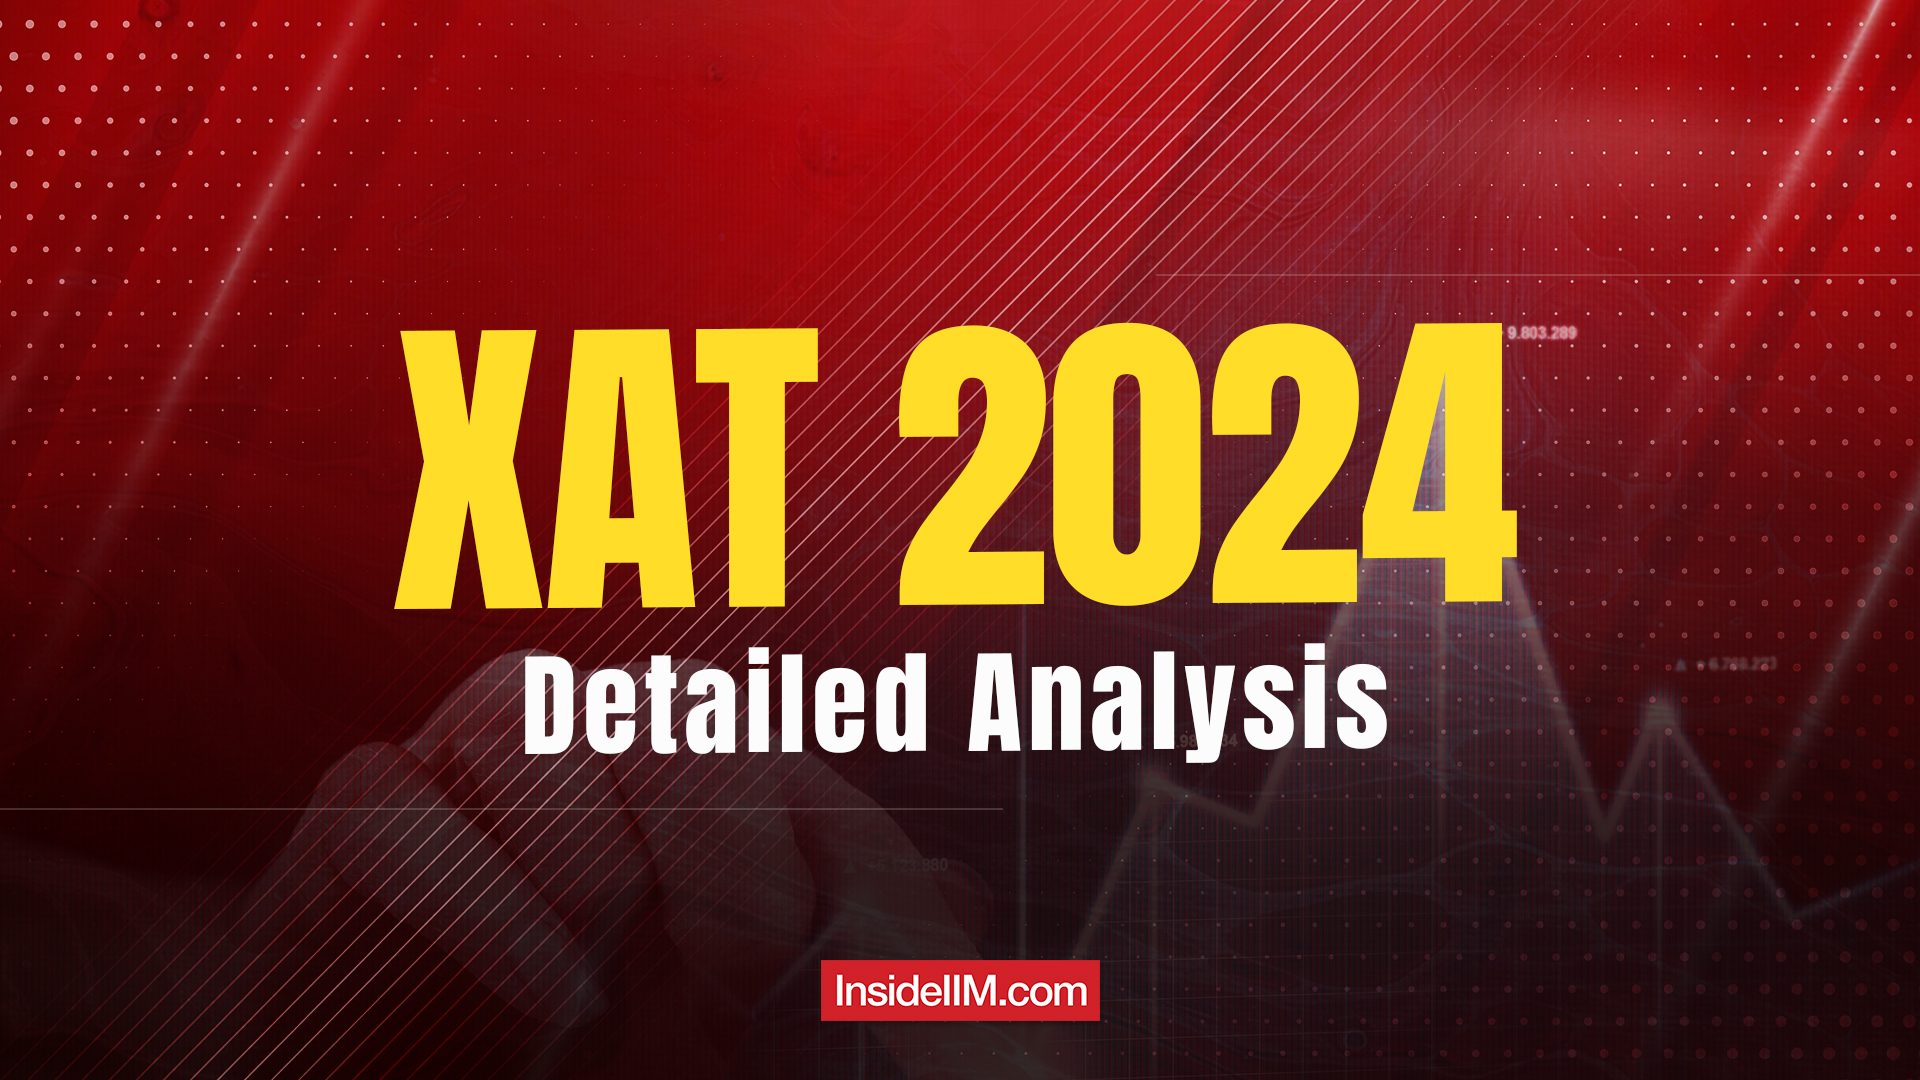 XAT 2024 Exam Analysis Check Expected Cutoffs and Score vs Percentile